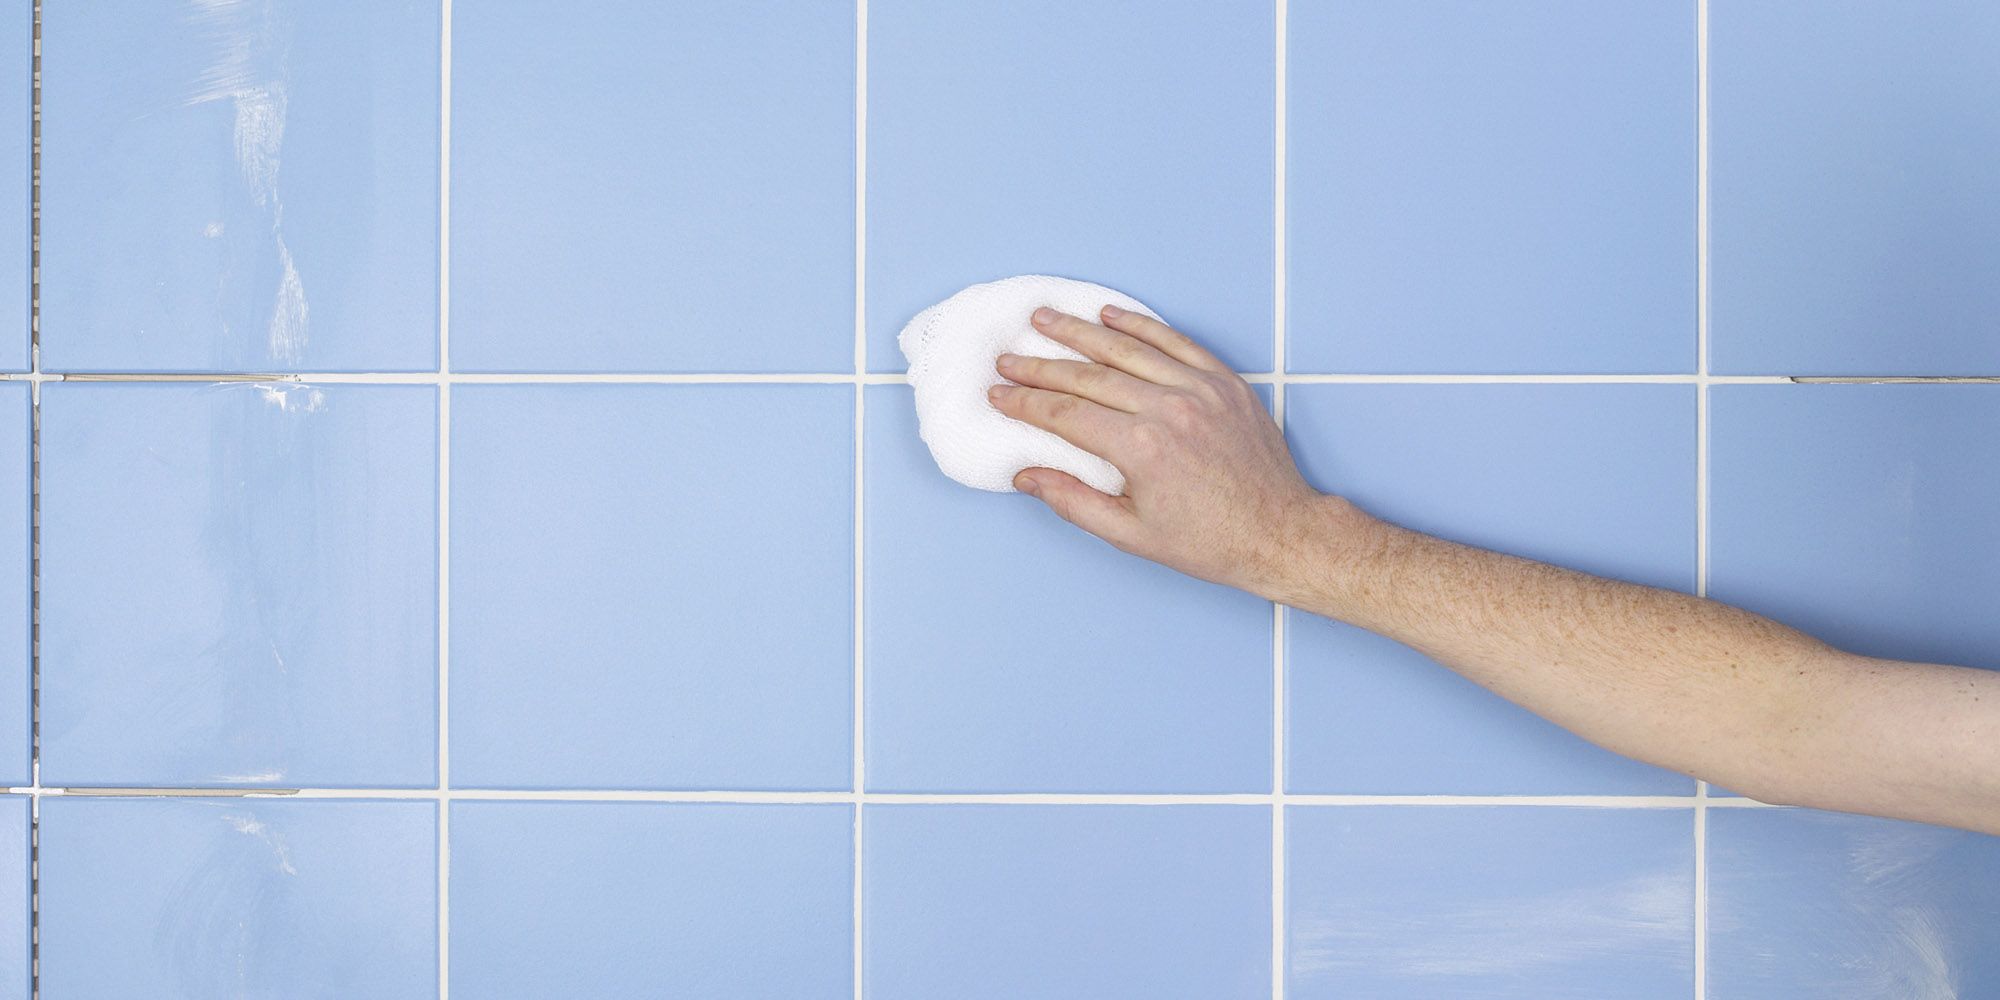 How to Clean Tile Grout - Best Way to Clean Grout